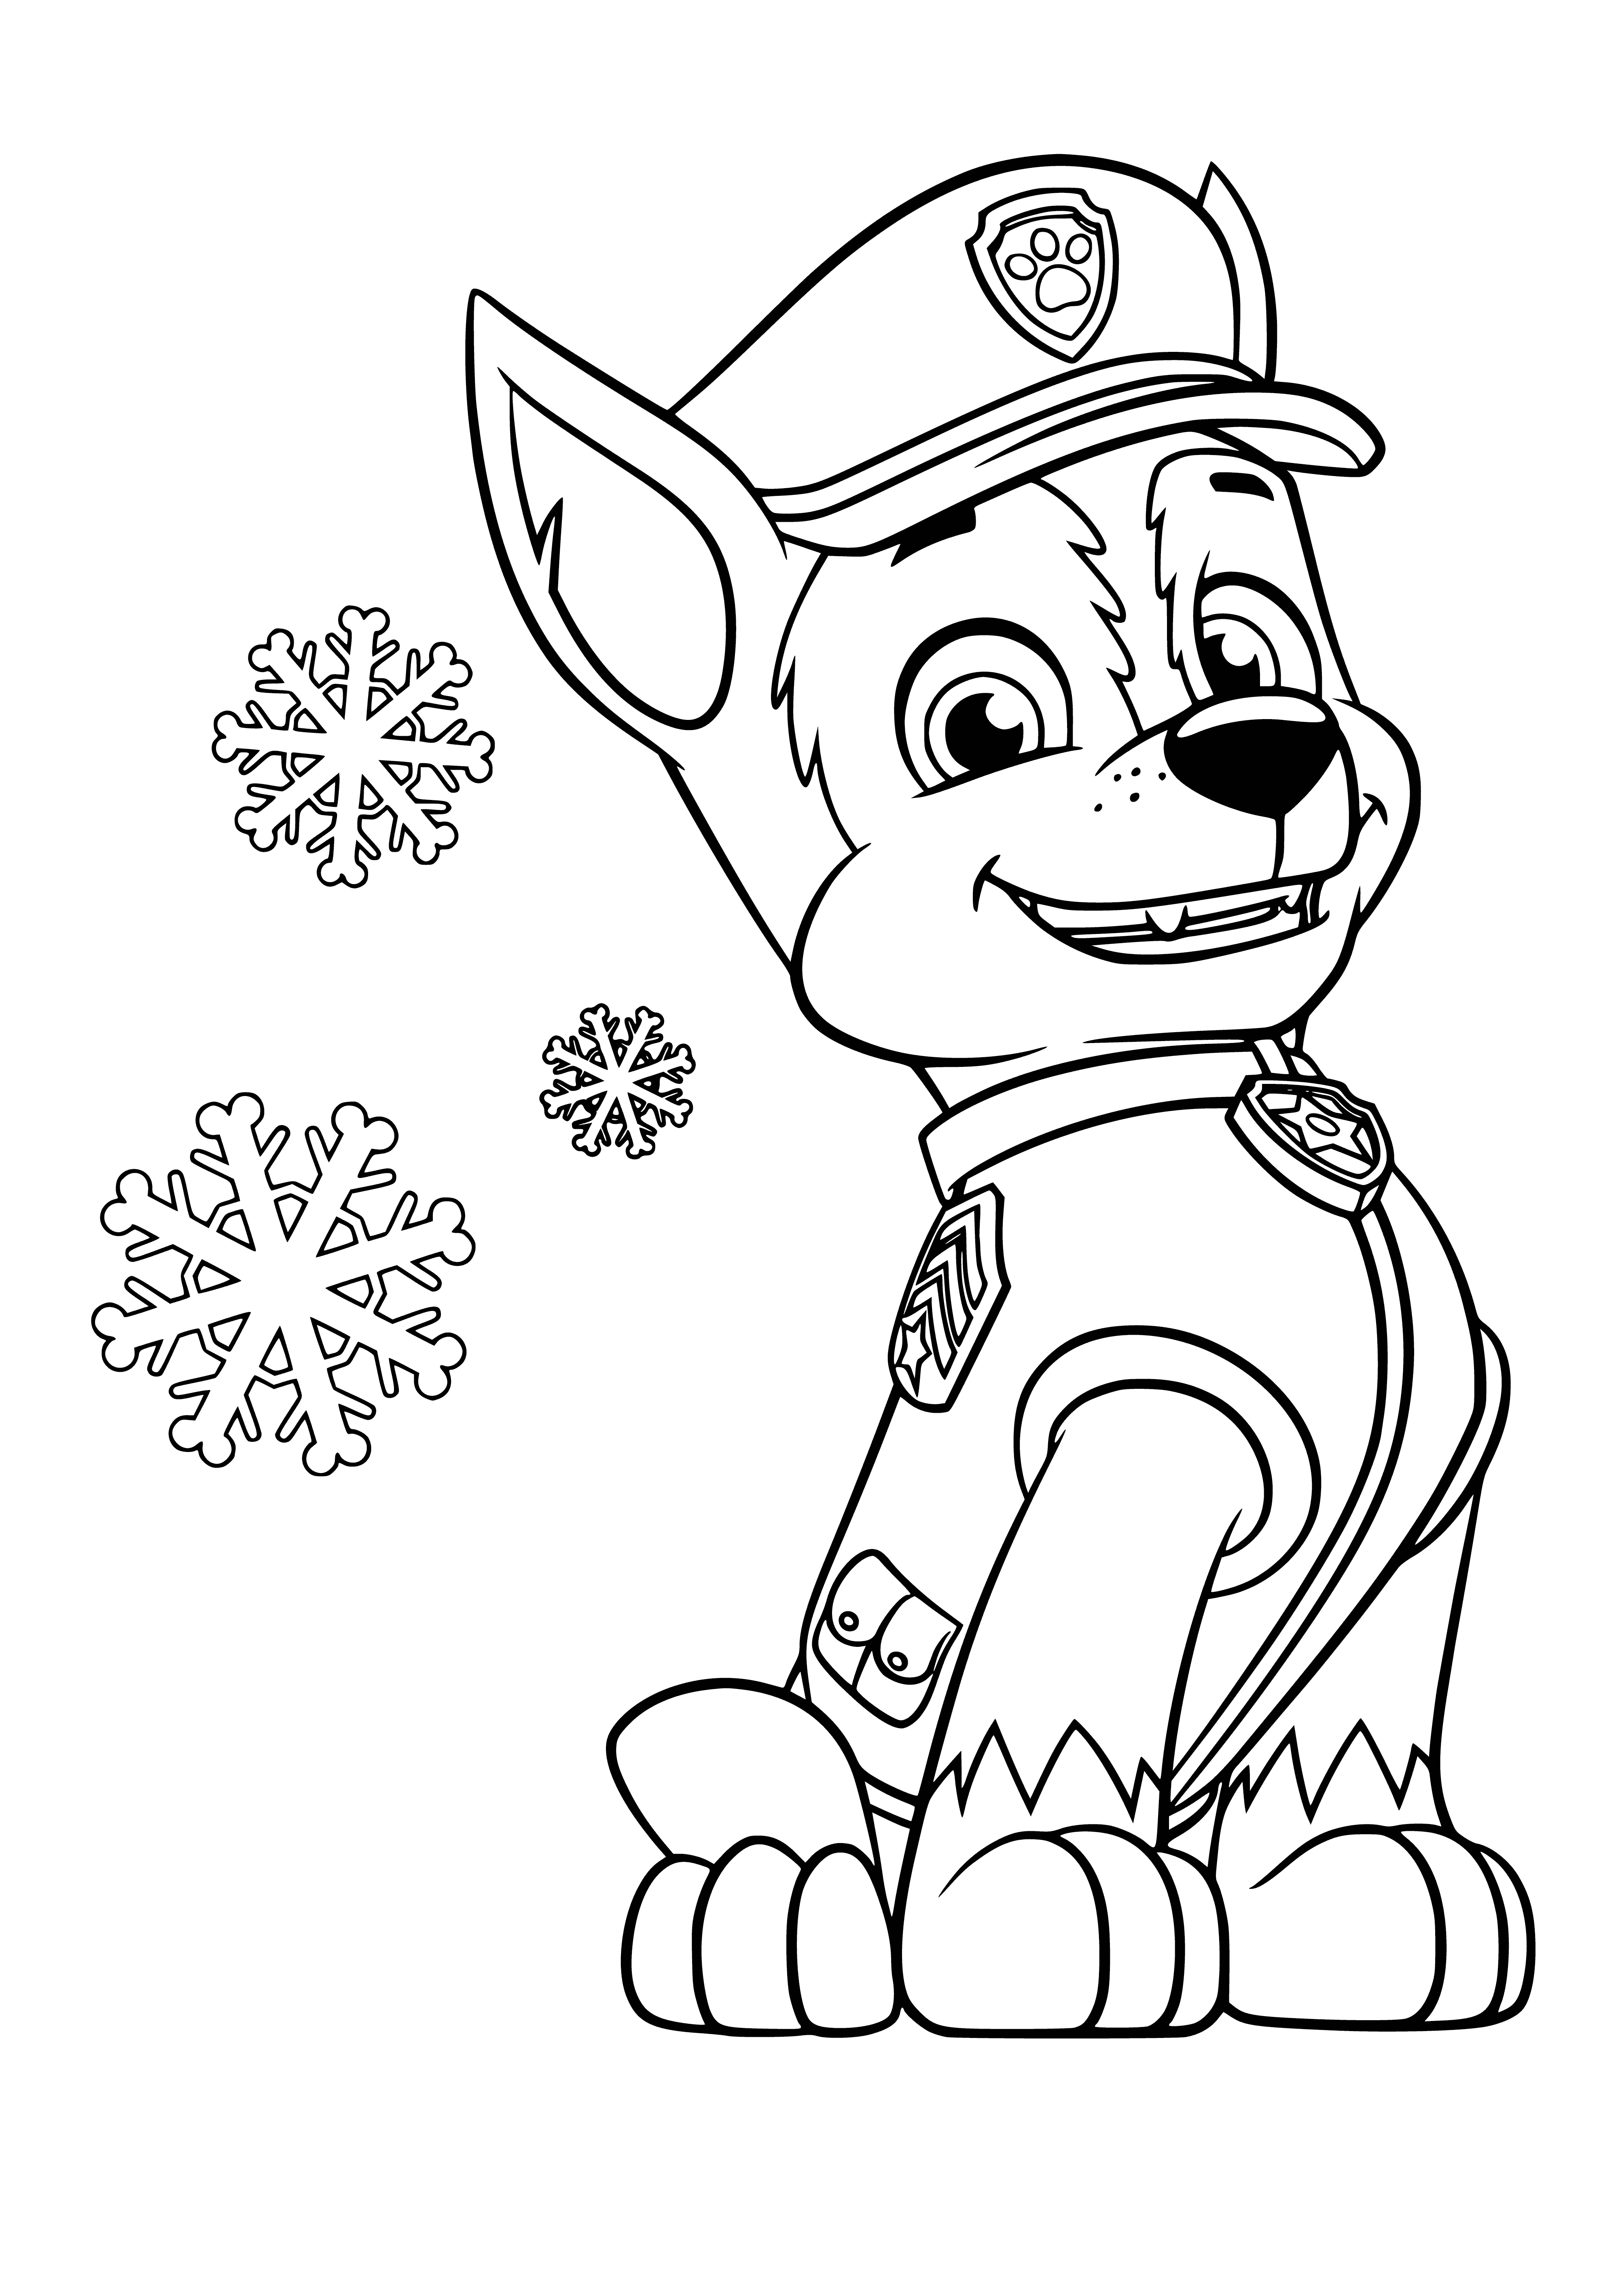 coloring page: PAW Patrol Racer: blue & white toy car w/Logo on front/back, 2 orange/white stripes & 4 blue wheels. Doors open to reveal blue/white interior.